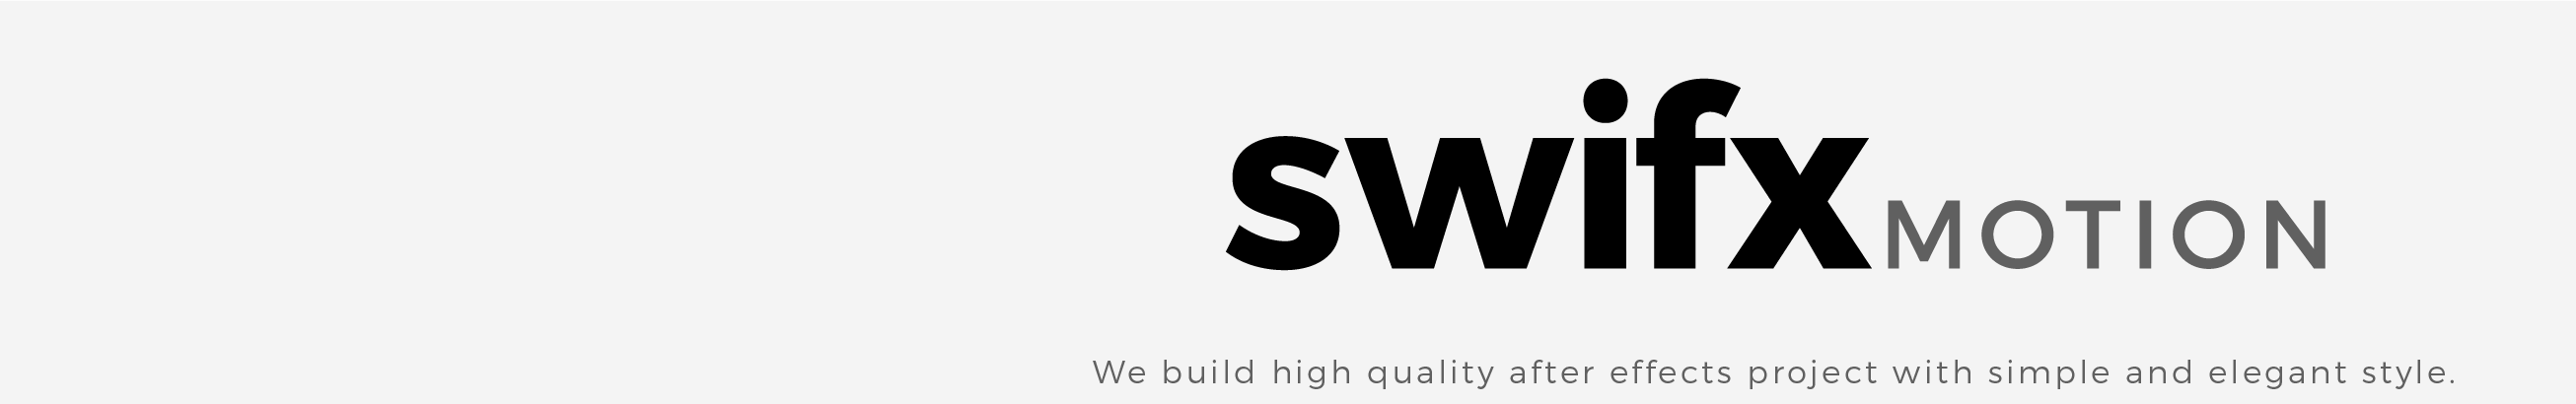 Swifx Motion's profile banner